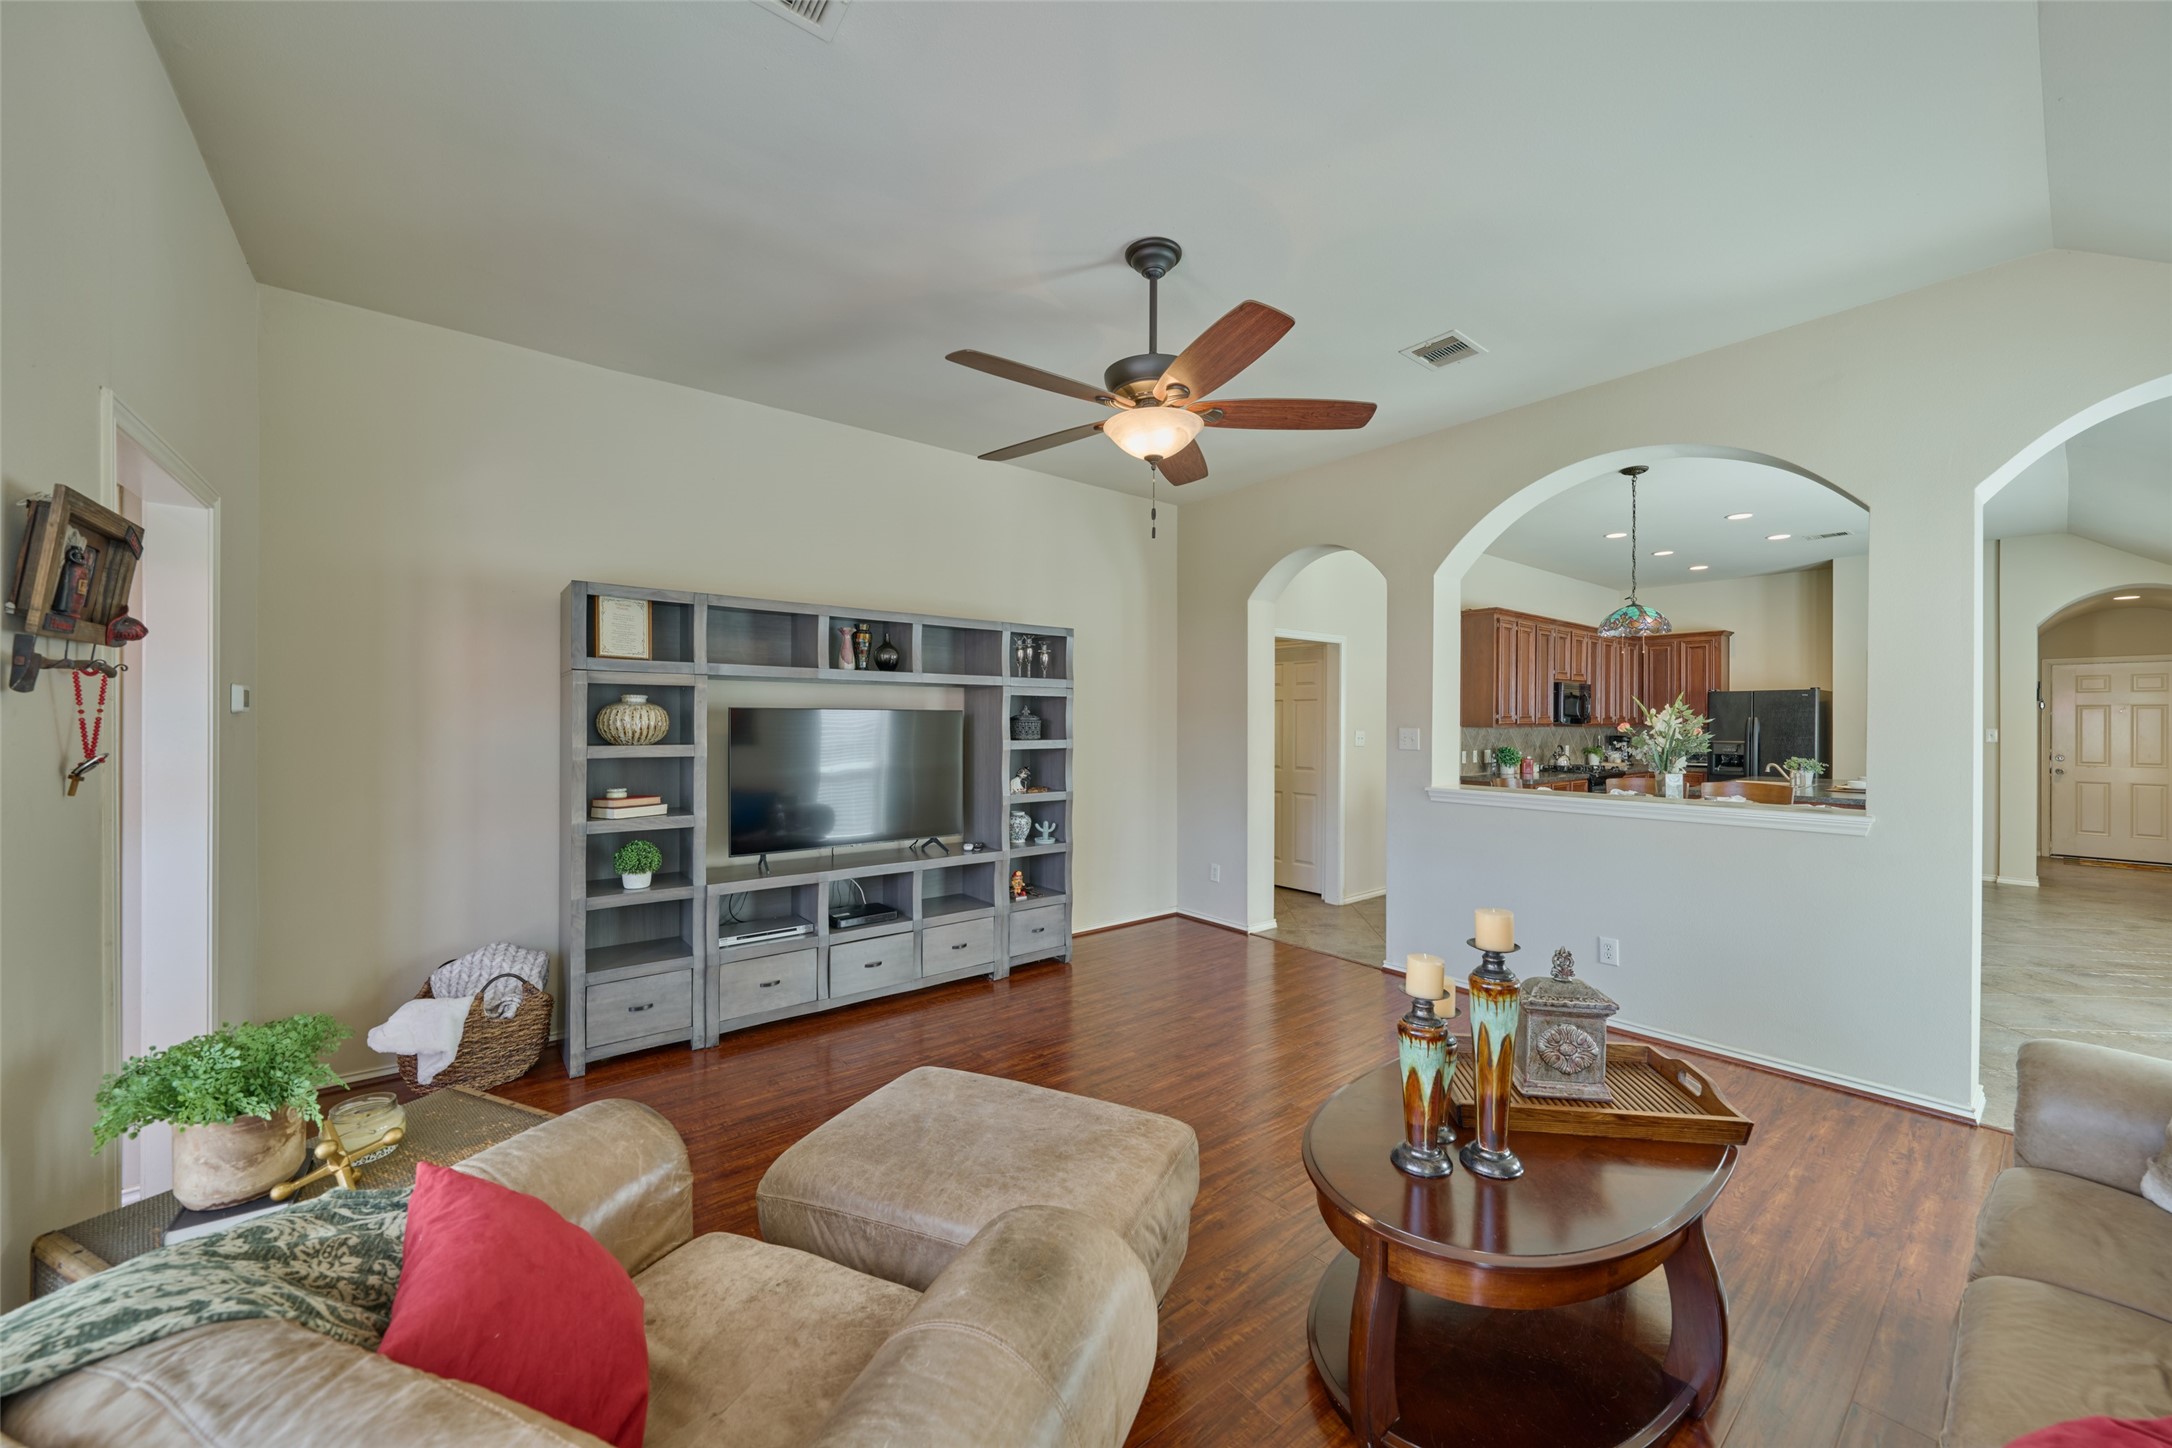 The family room is a great size and features laminate wood floors, tall ceilings, and natural light.